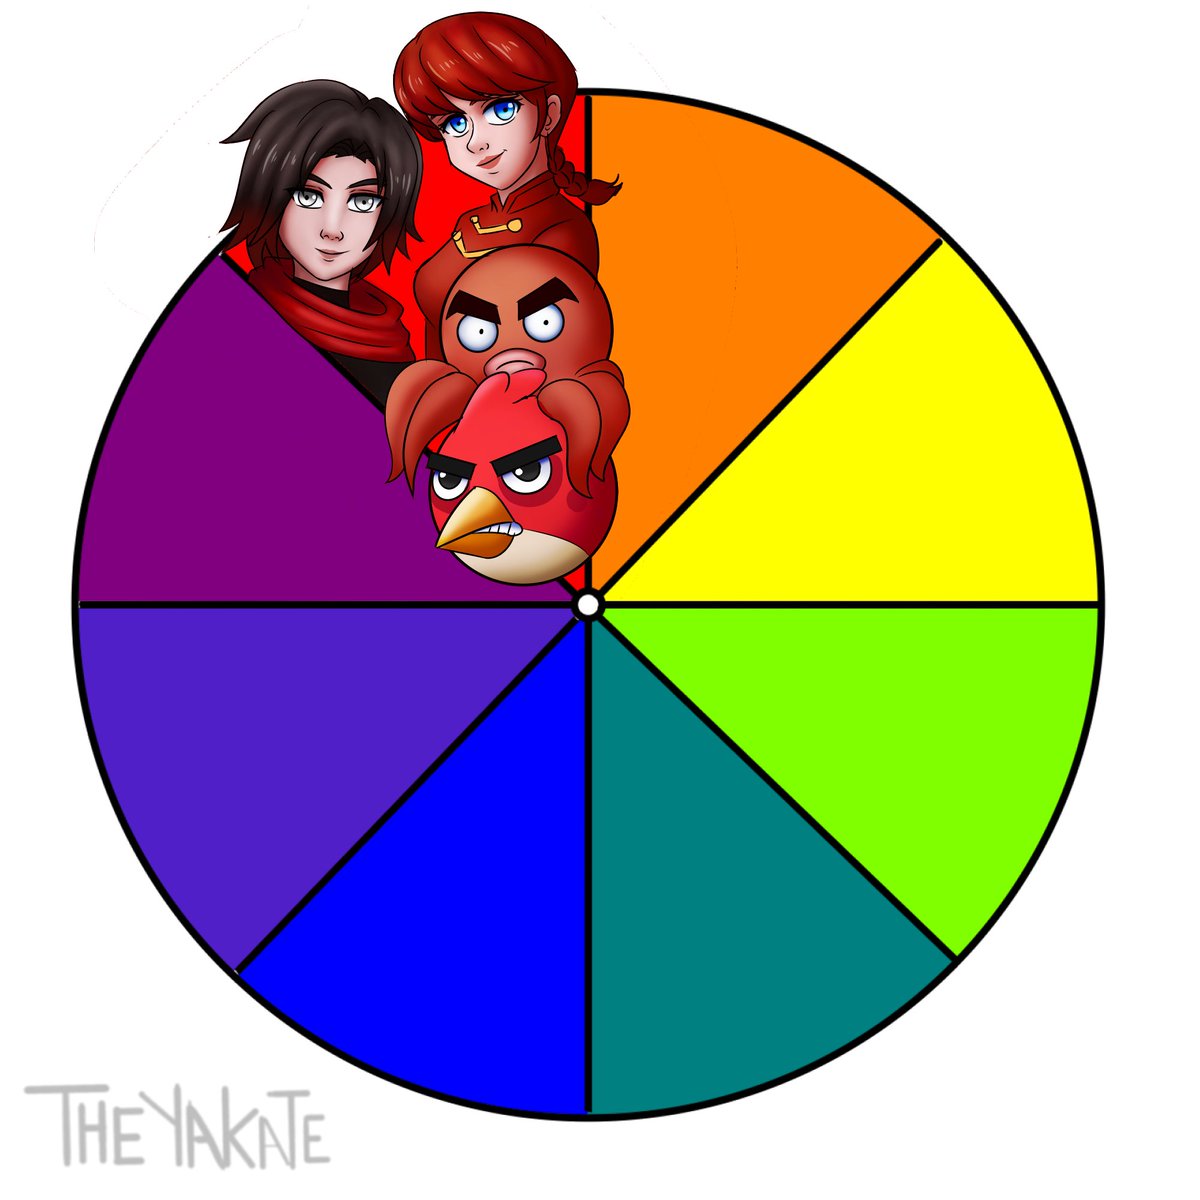 Done with the Red Now Lets do the Purple. #Colorwheel